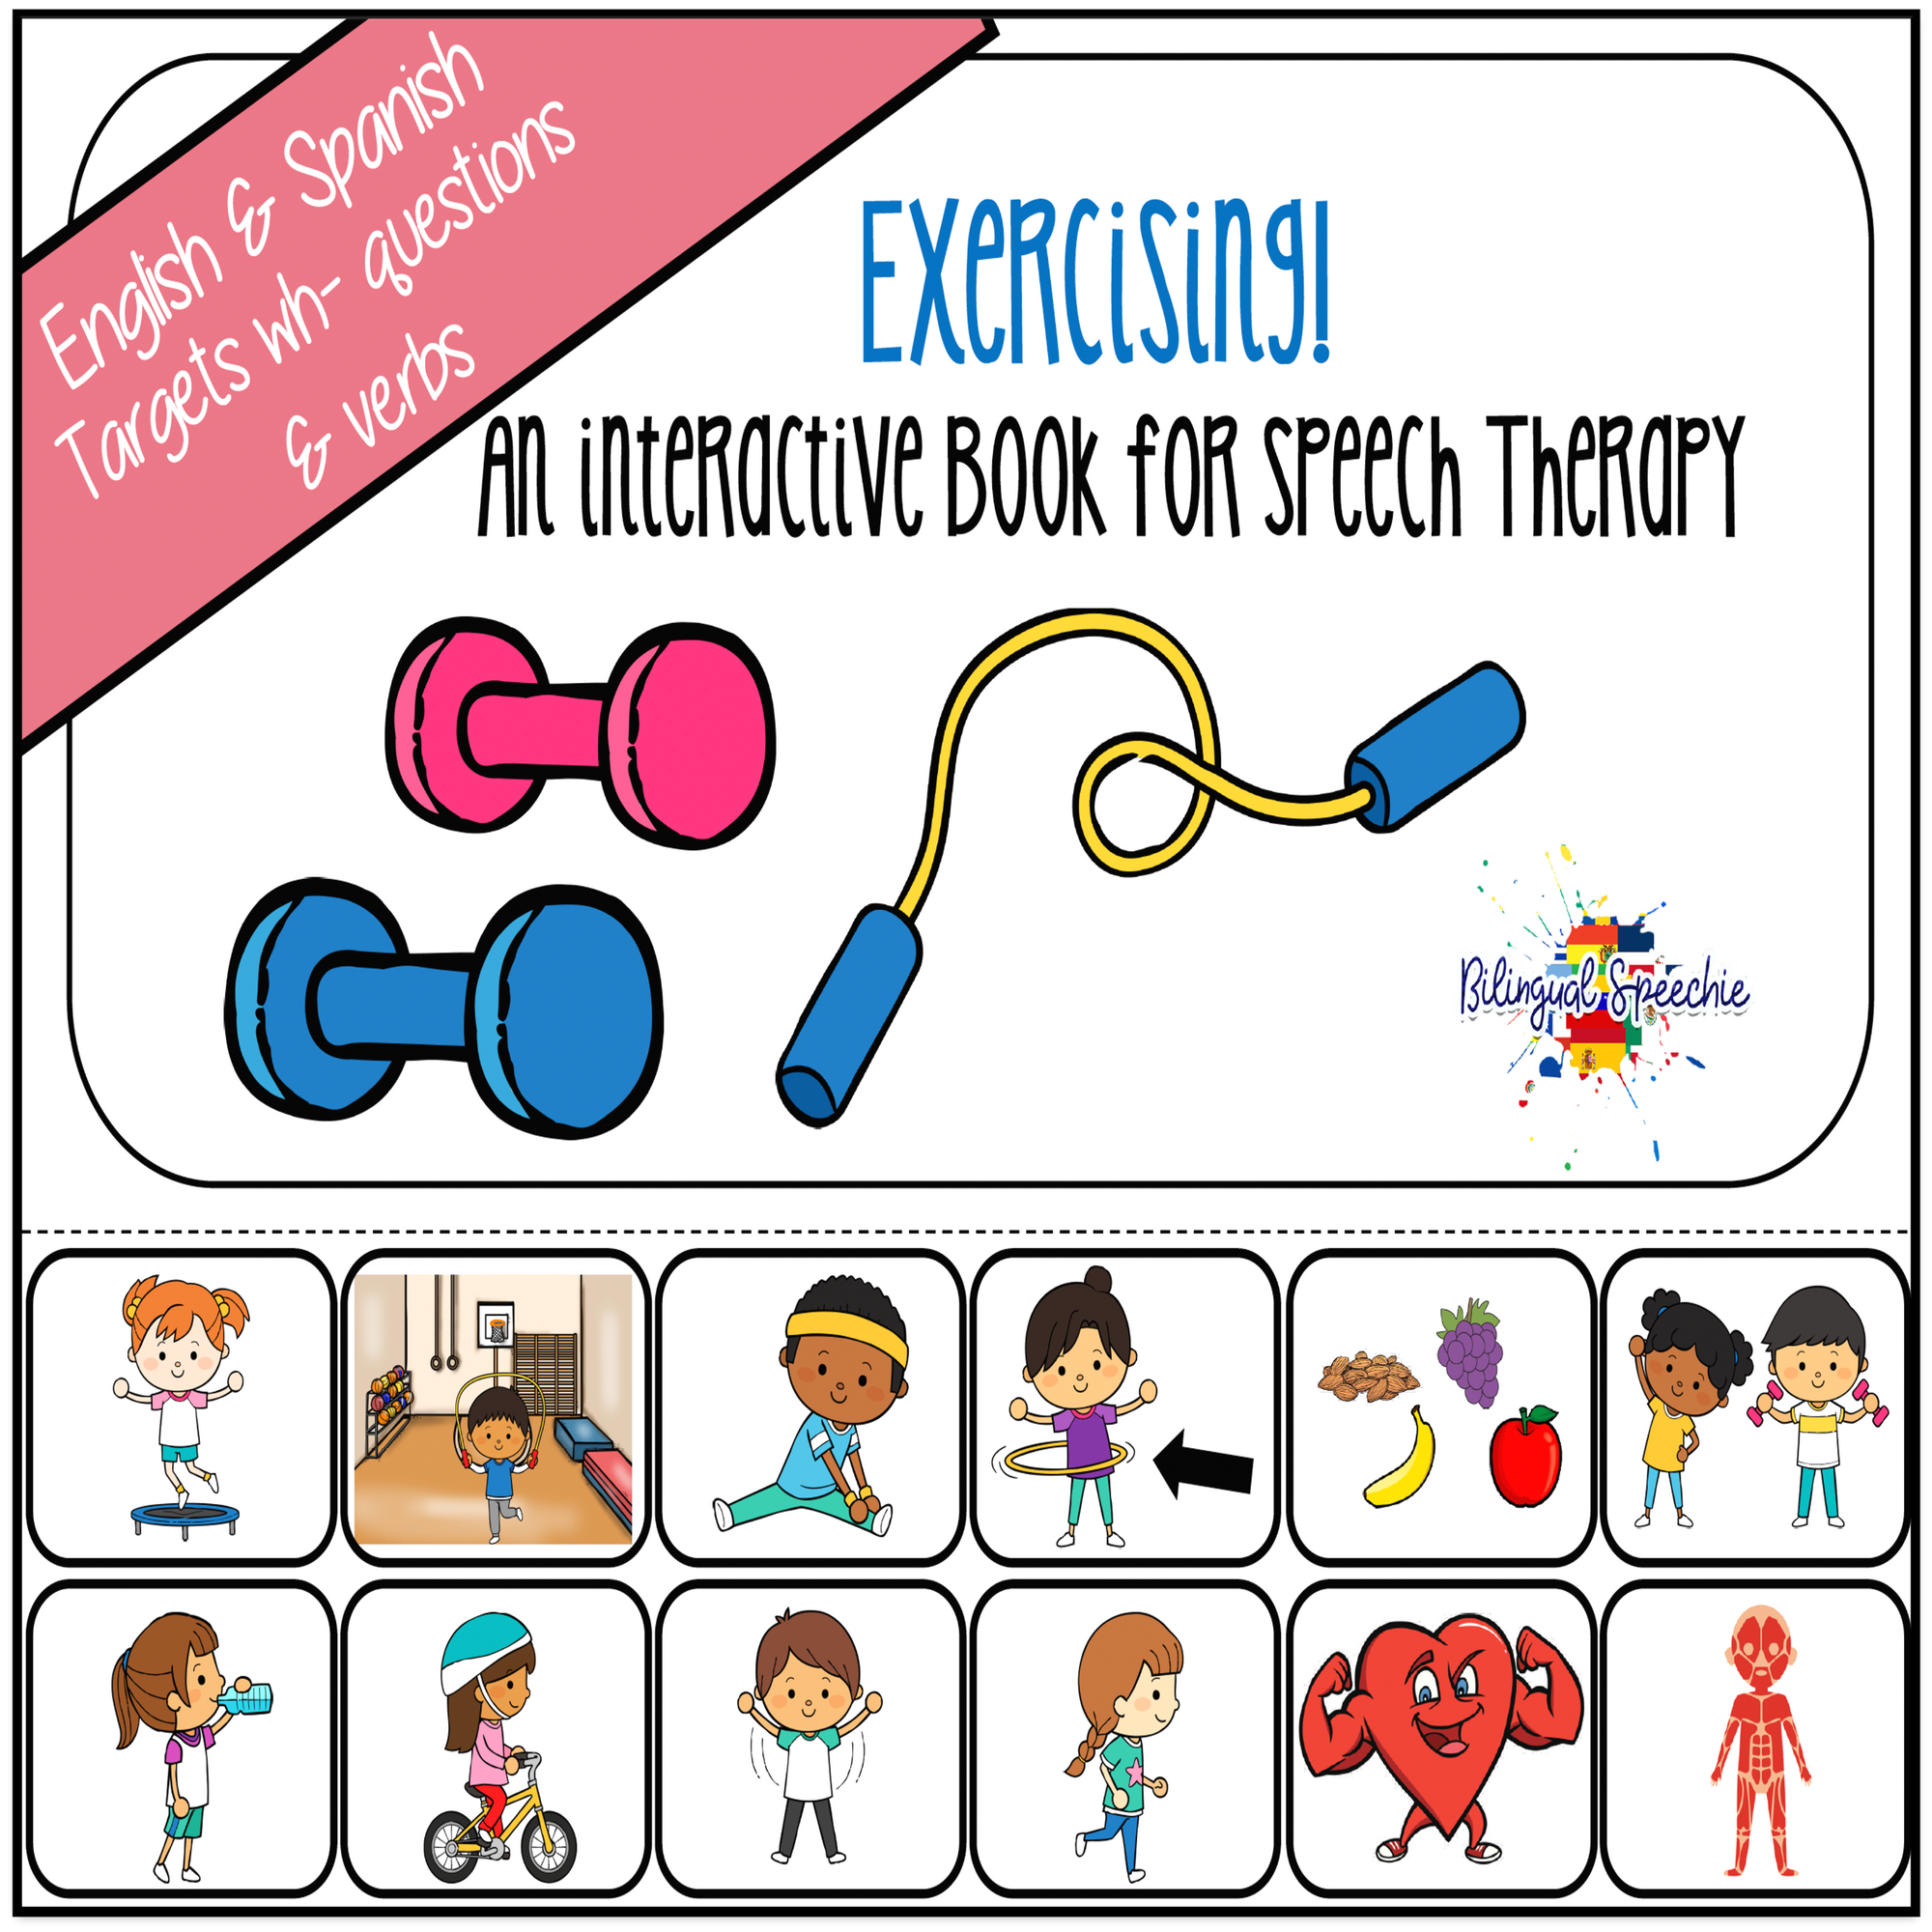 Exercising! A Bilingual Interactive Book for Speech Therapy